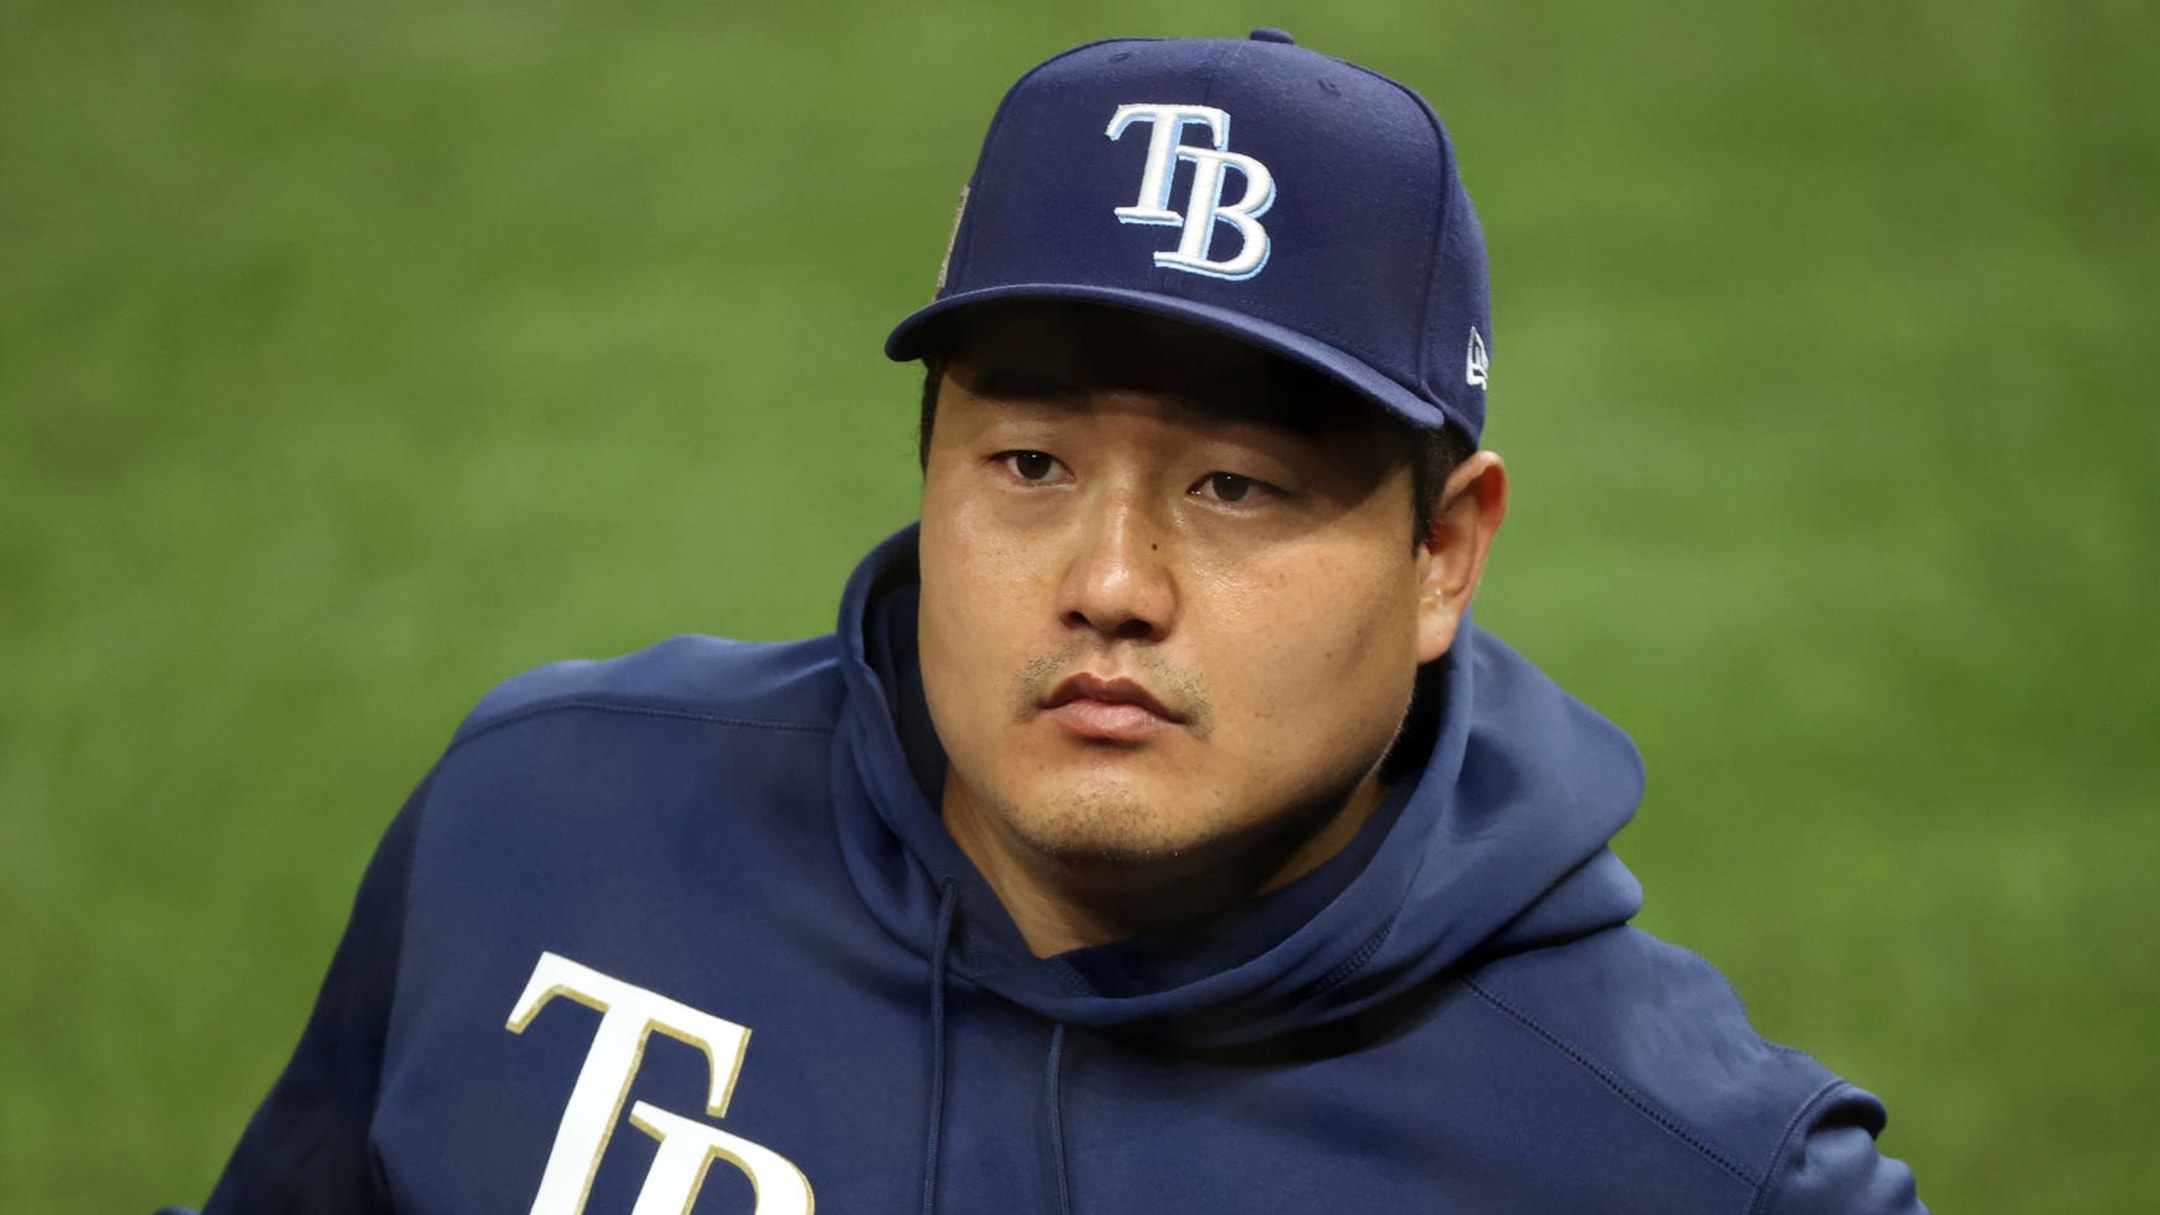 Can Ji-Man Choi Be the Answer at First Base for the Yankees?